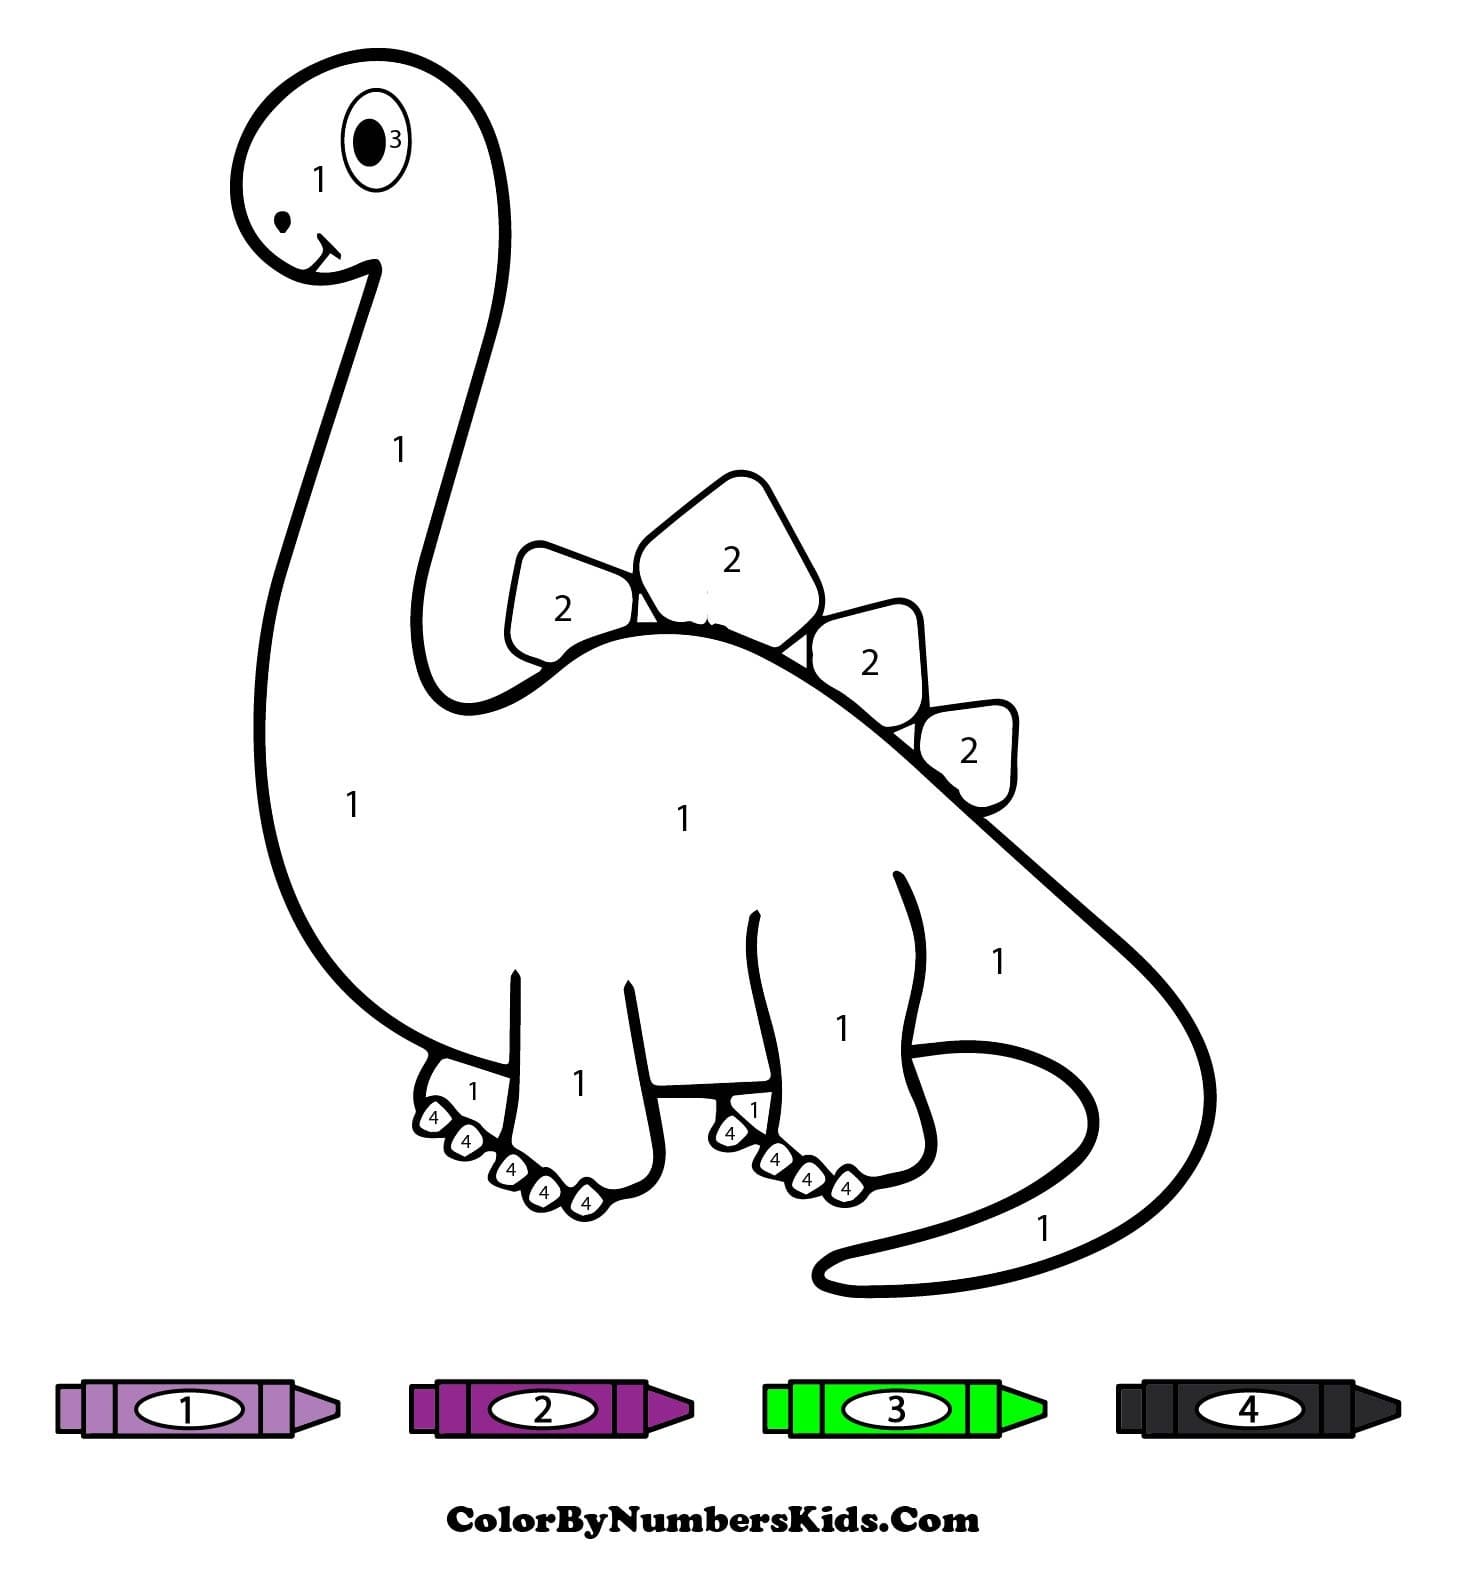 Cute Dinosaur Color By Number For Kids